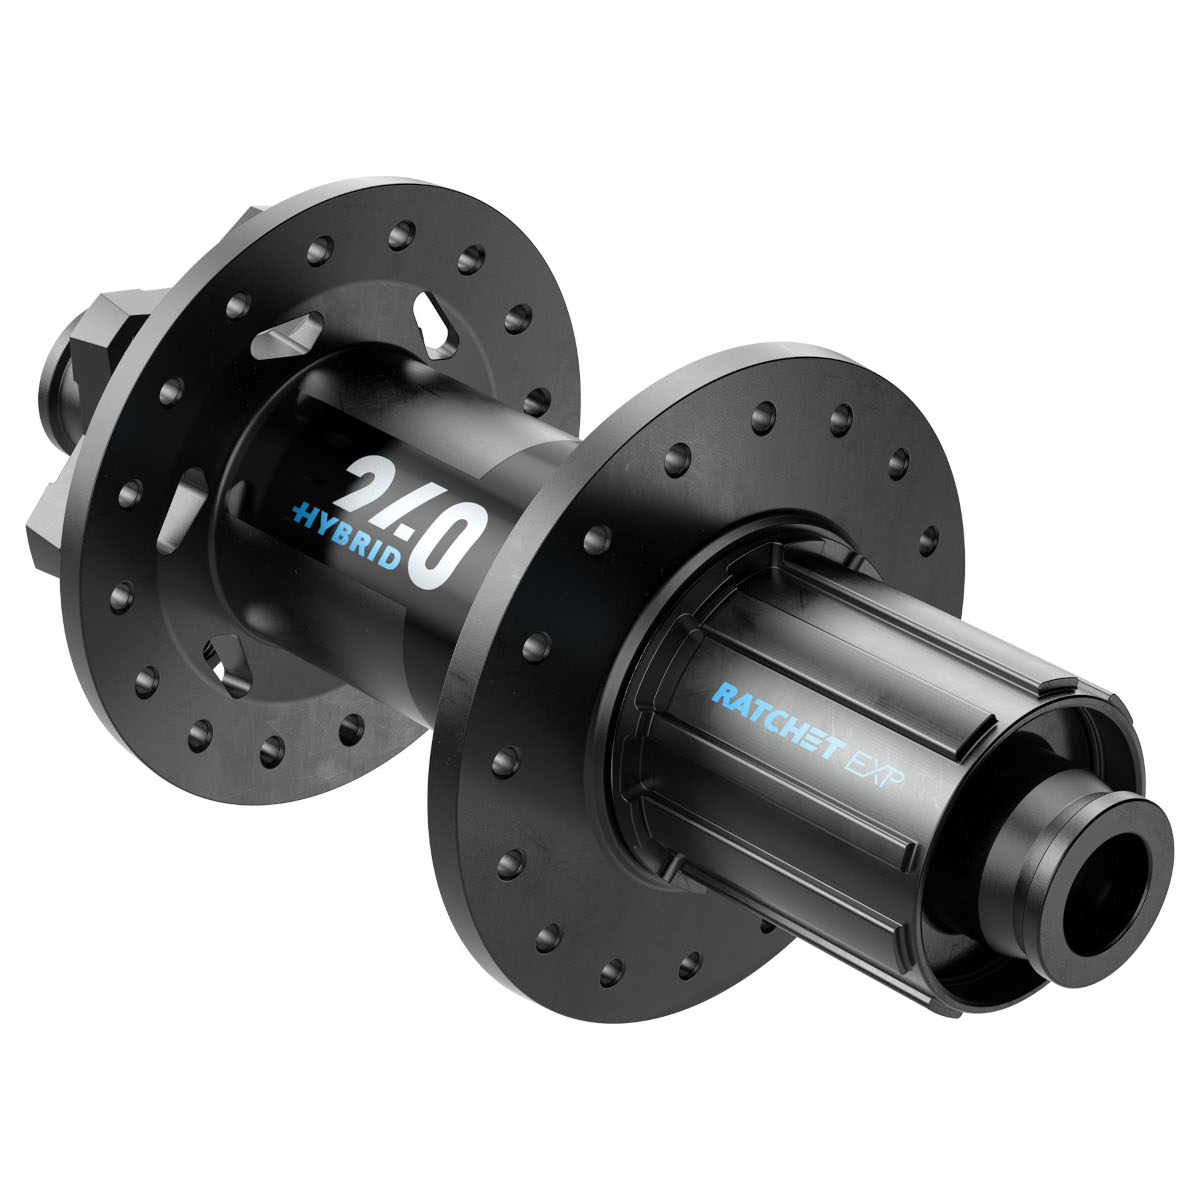 Picture of DT Swiss 240 Hybrid Rear Hub - EXP - 6-Bolt | 12x148mm Boost - Shimano HG